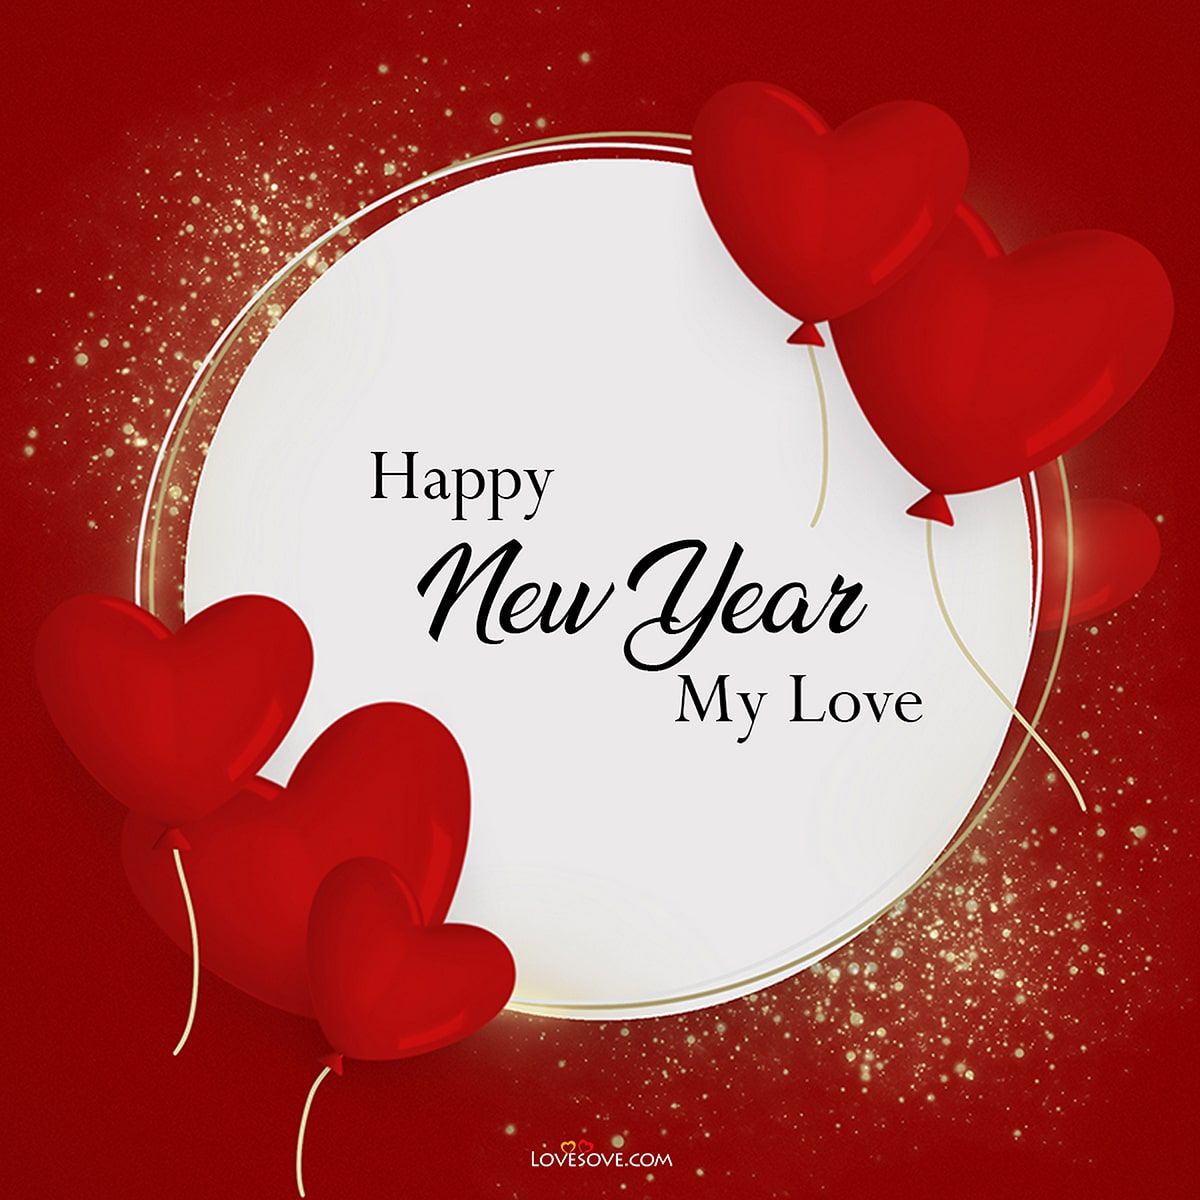 Happy New Year Wishes for Husband-Wife